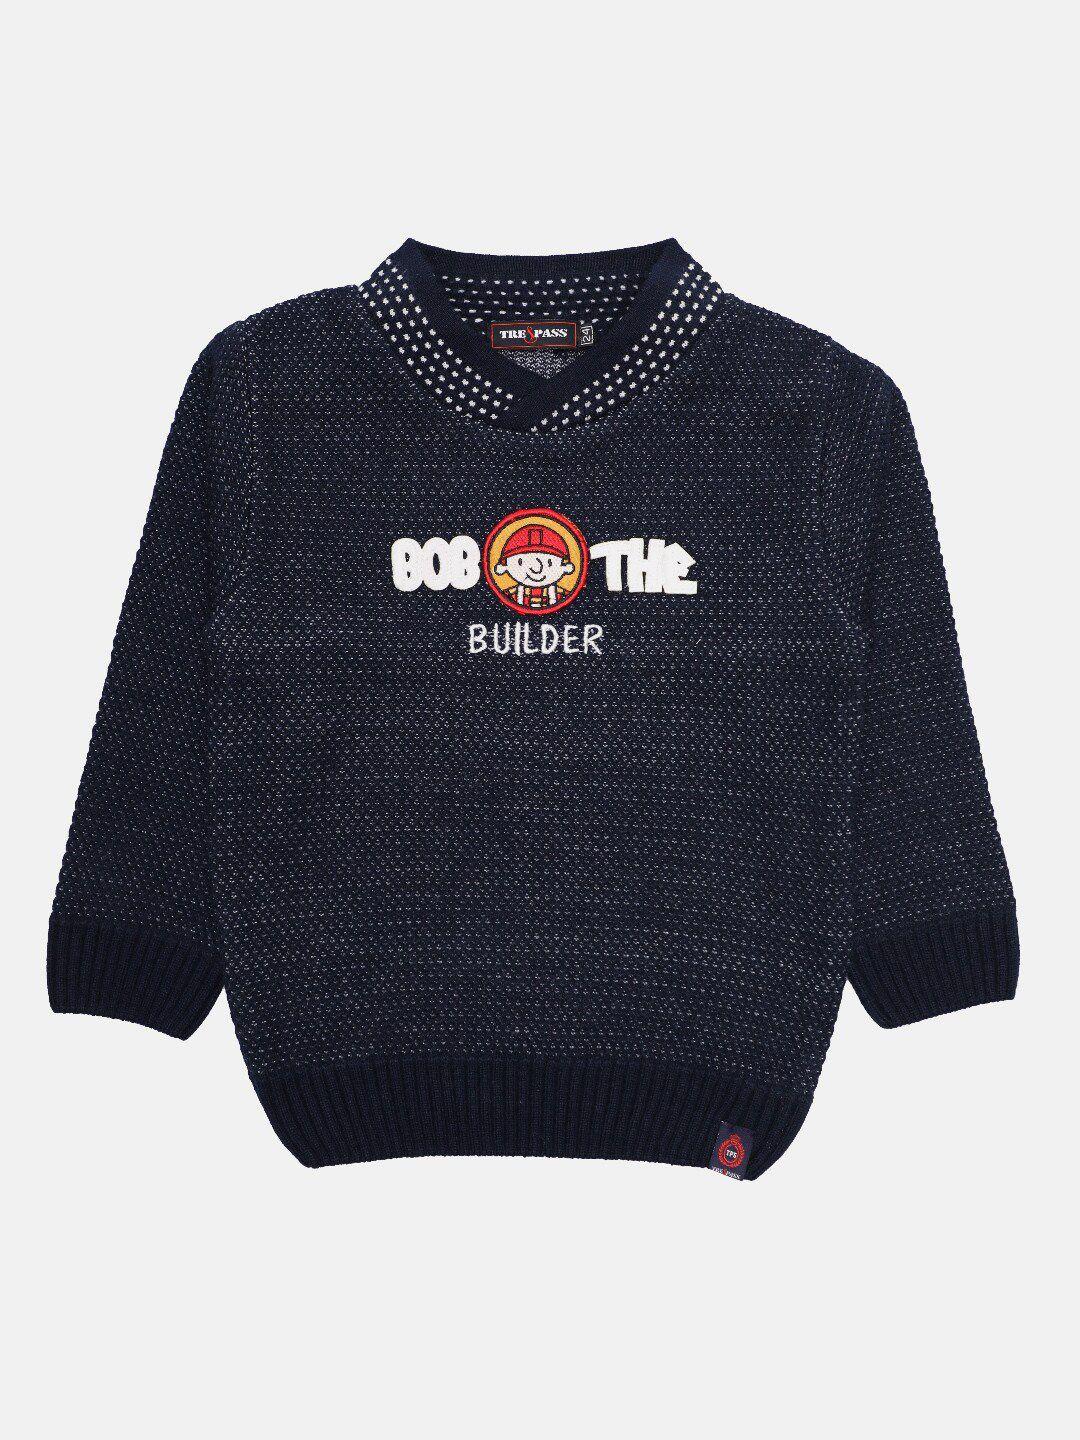 tre&pass boys navy blue & white printed woolen pullover